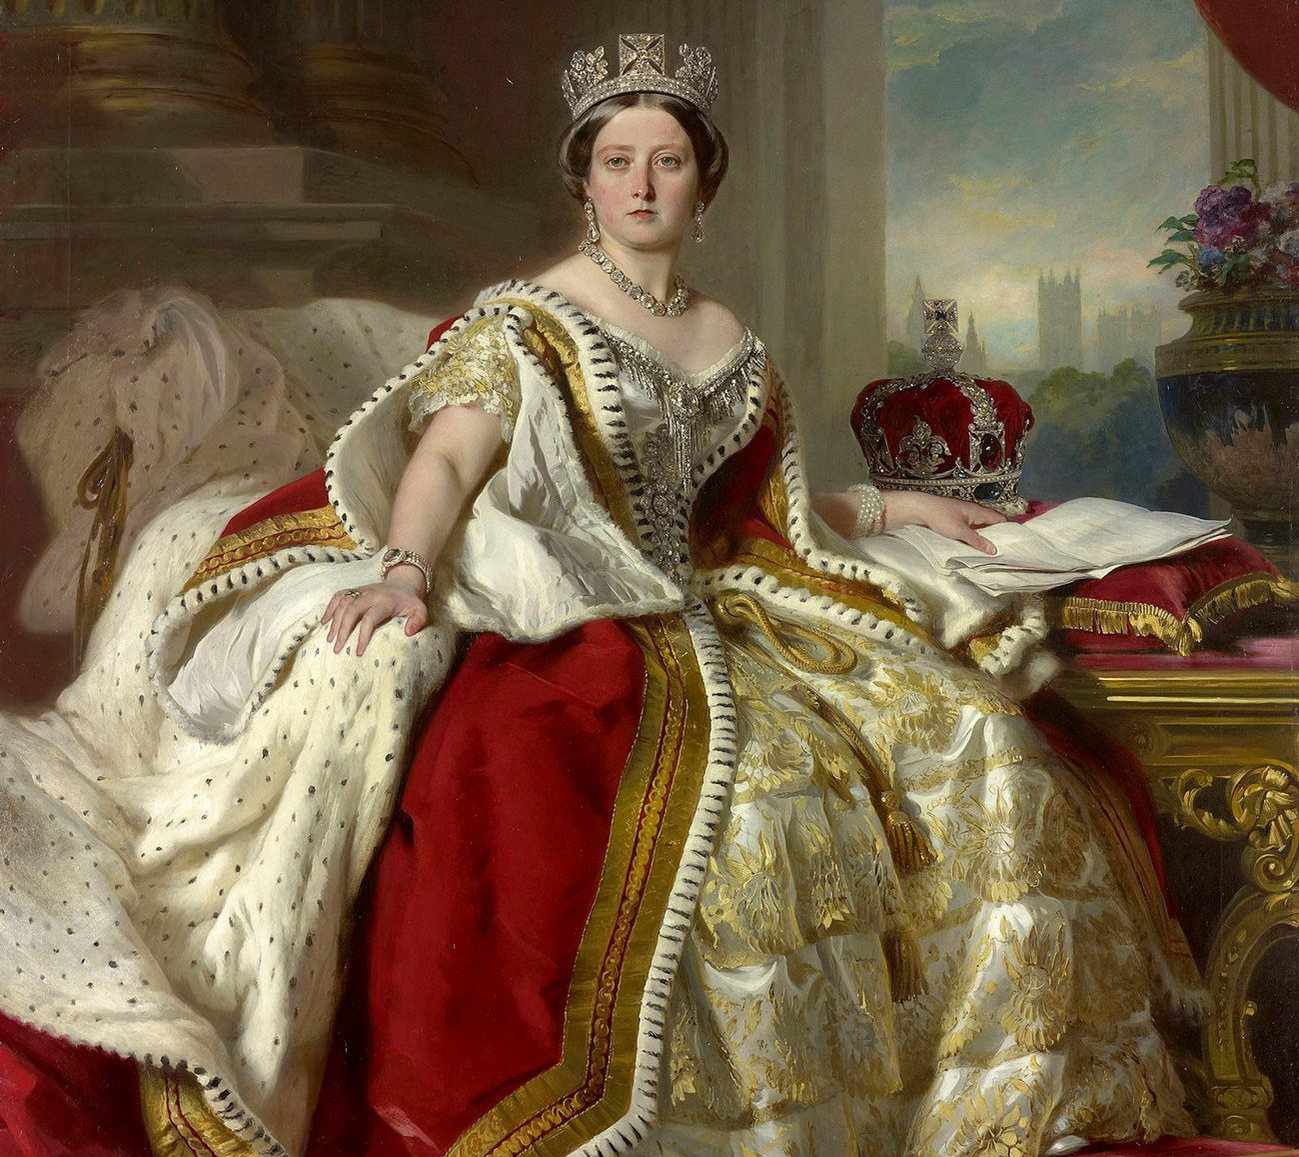 The portrait shows a woman wearing a red royal attire with a crown 